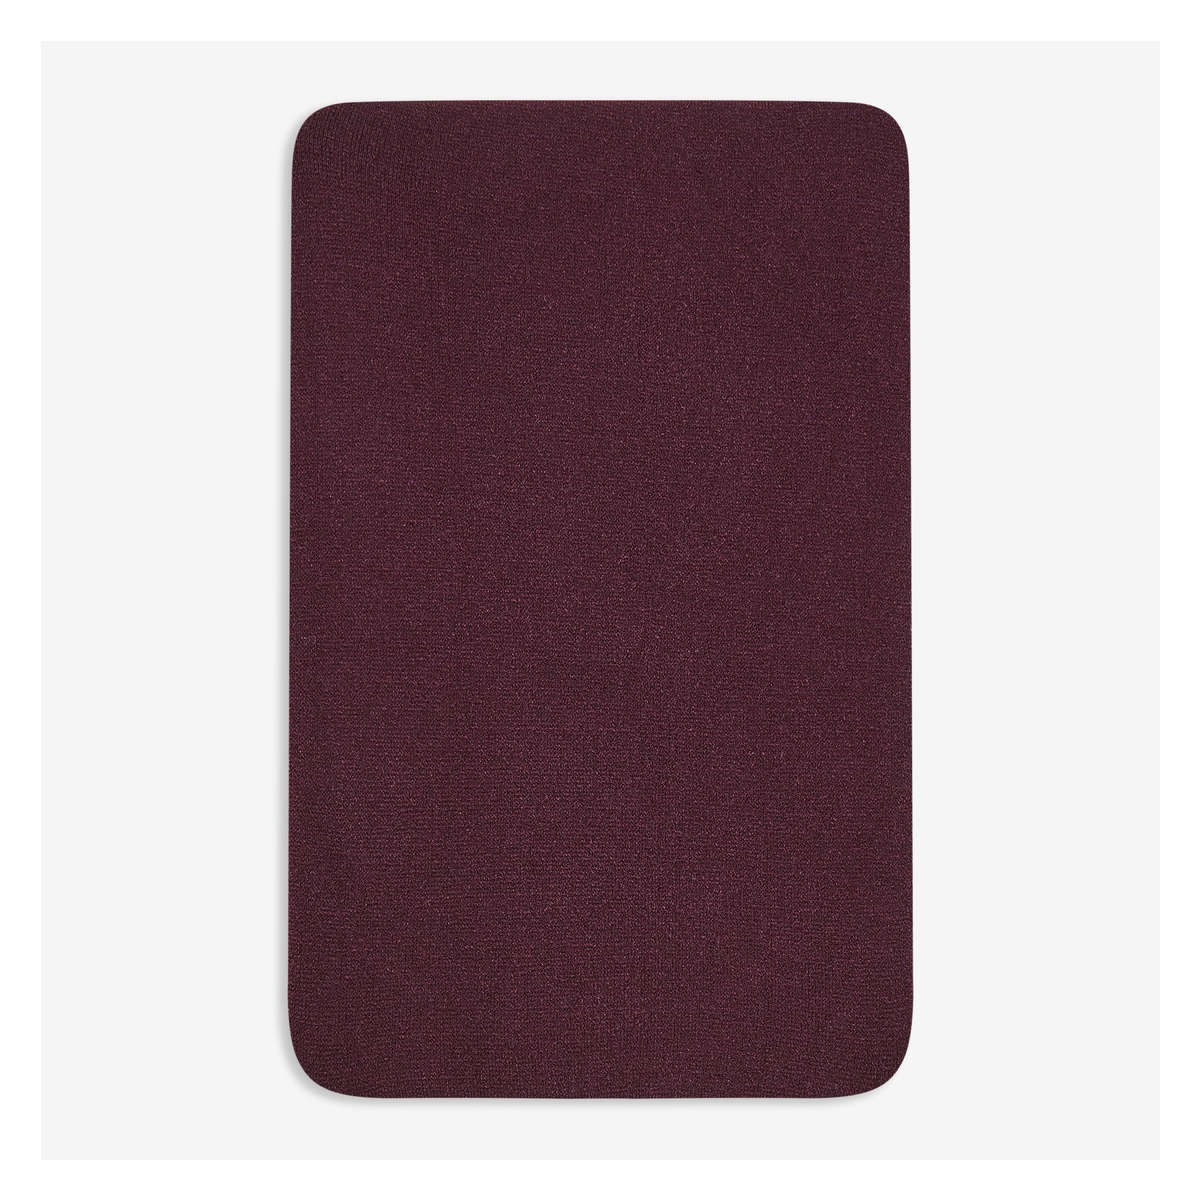 Opaque Tights in Burgundy from Joe Fresh